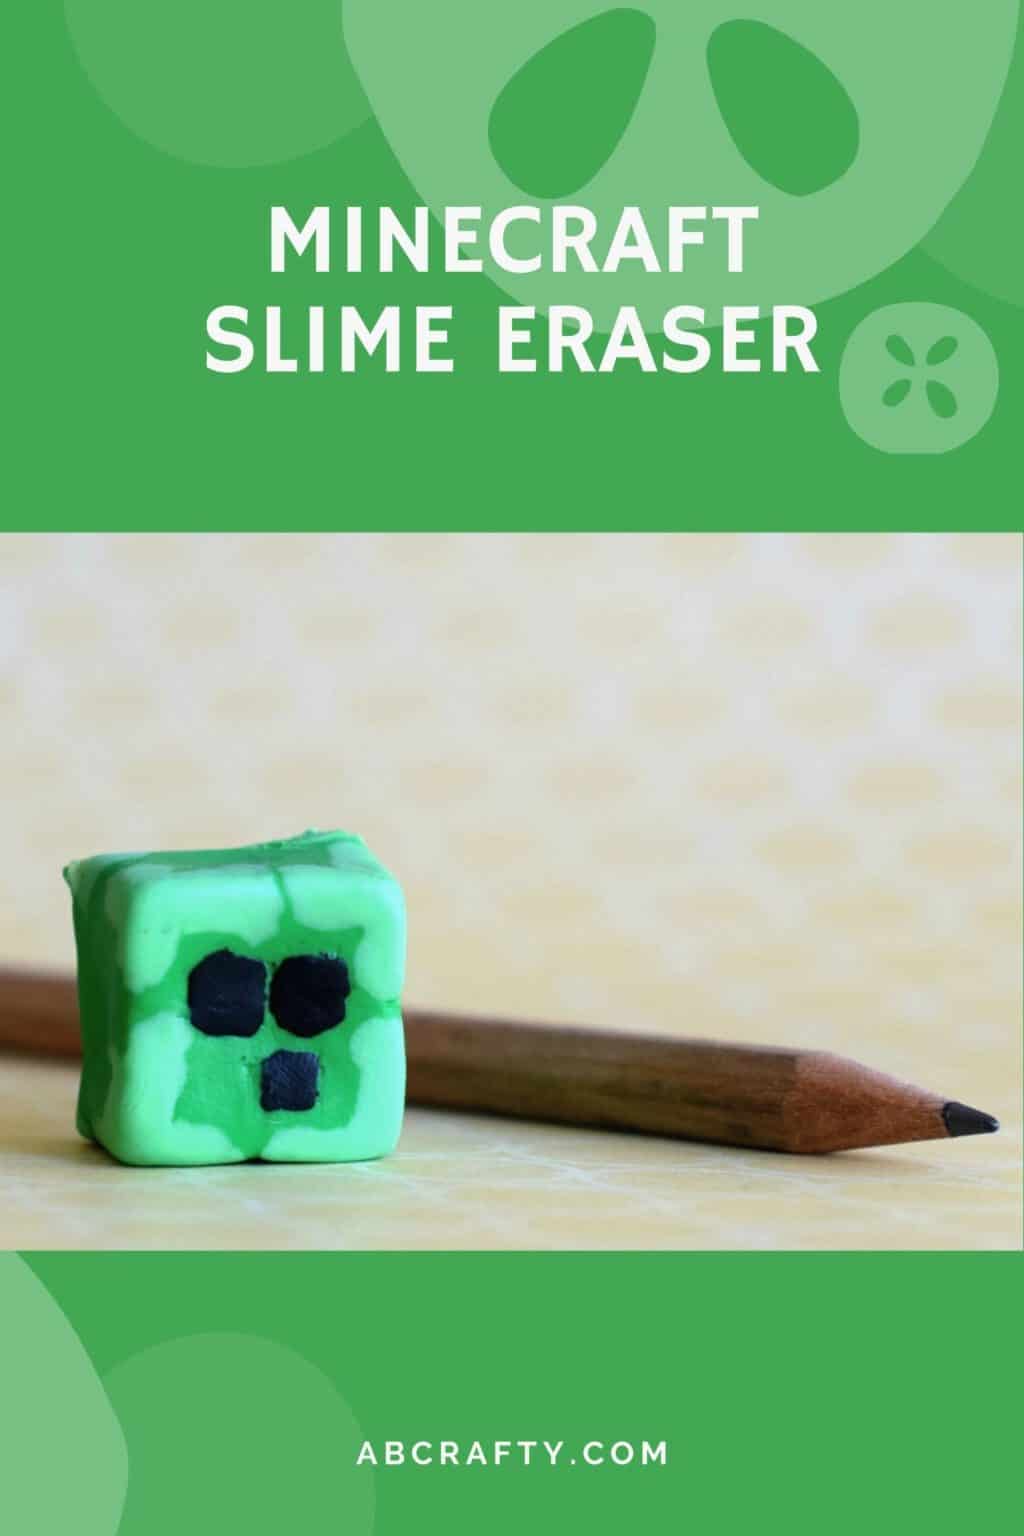 homemade eraser in the shape of a minecraft slime block made from creatibles diy eraser kit with the title 'minecraft slime eraser, abcrafty.com'